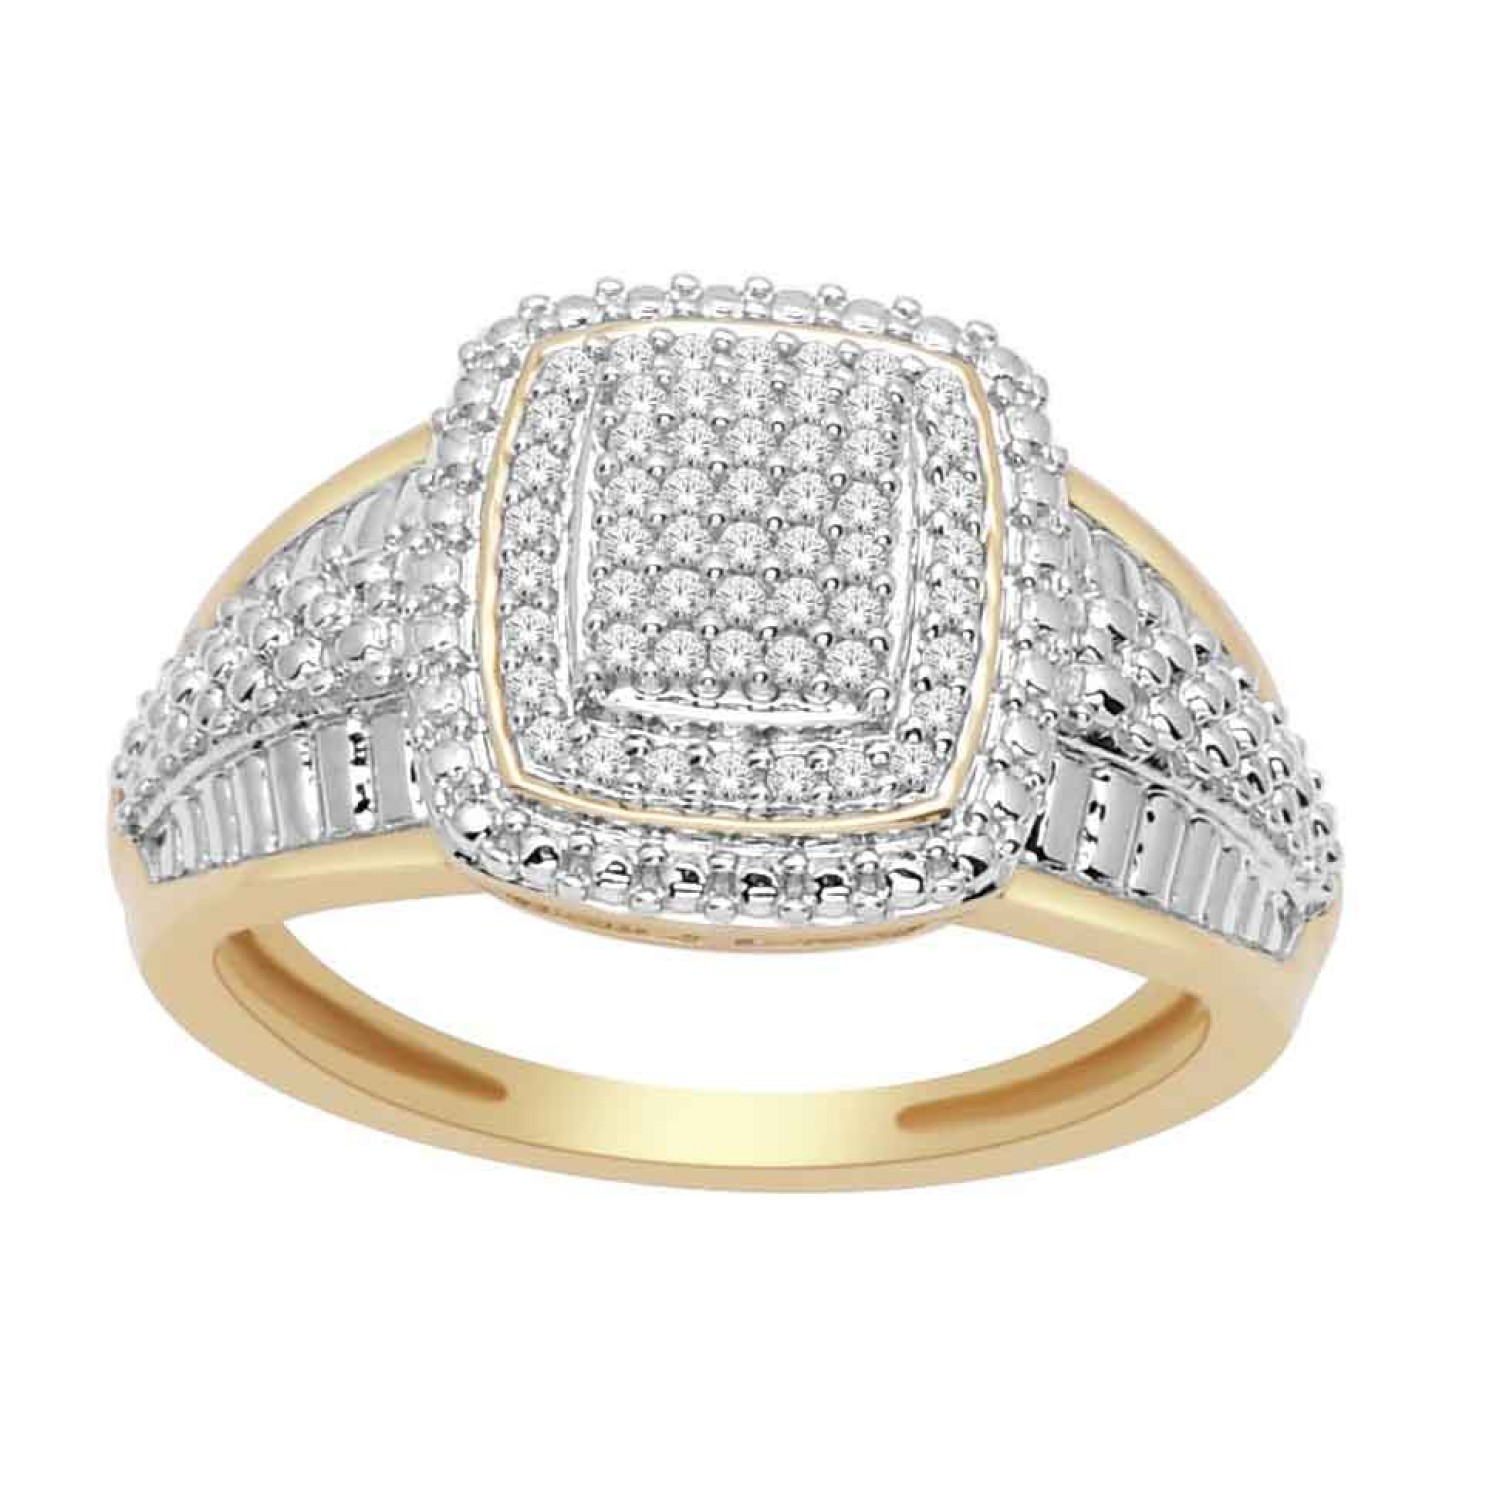 9ct Diamond Yellow Gold Engagement Ring 0.15ct TDW. A 9ct Diamond Engagement Ring  with a total of 0.15ct in Diamonds 5 Year Written Guarantee LAYBUY - Pay it easy, in 6 weekly payments and have it now. Only pay the price of your purchase, when you pay yo